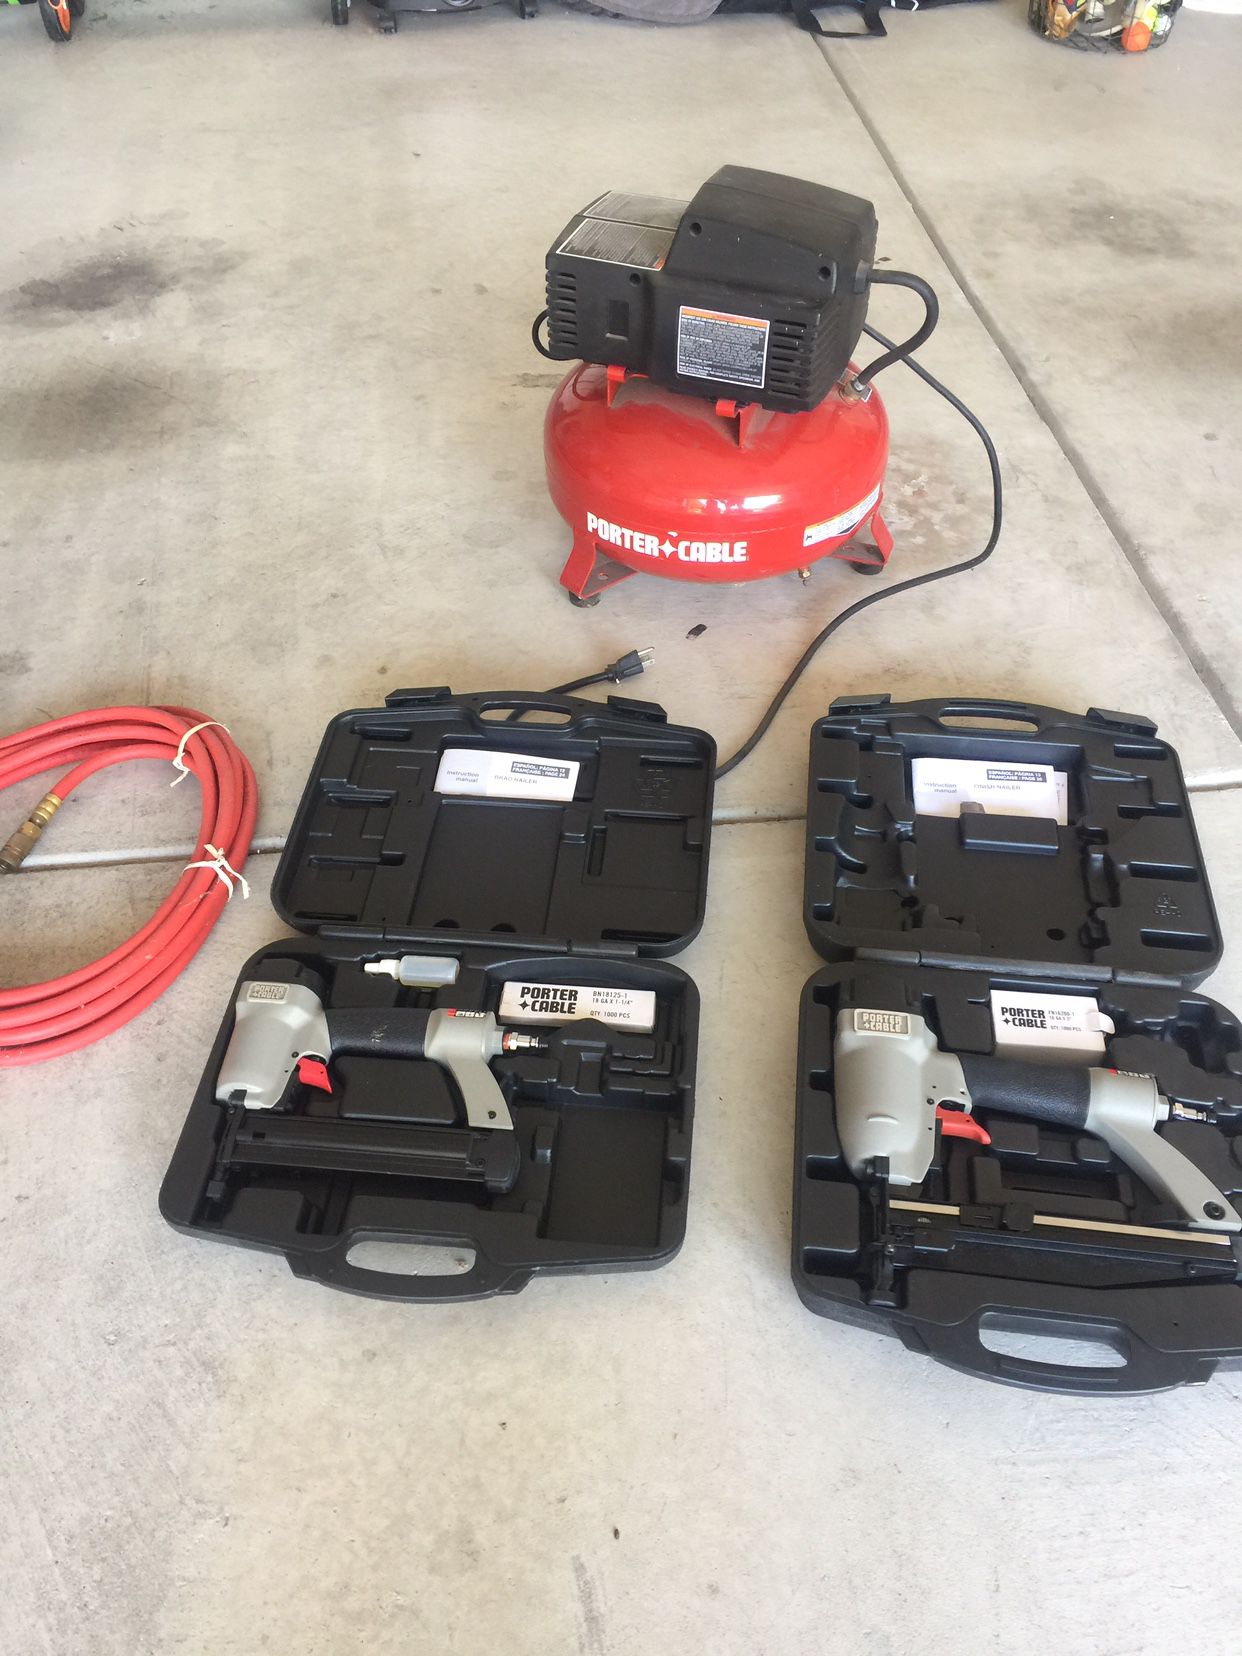 Porter And cable Air Compressor And Nail guns 